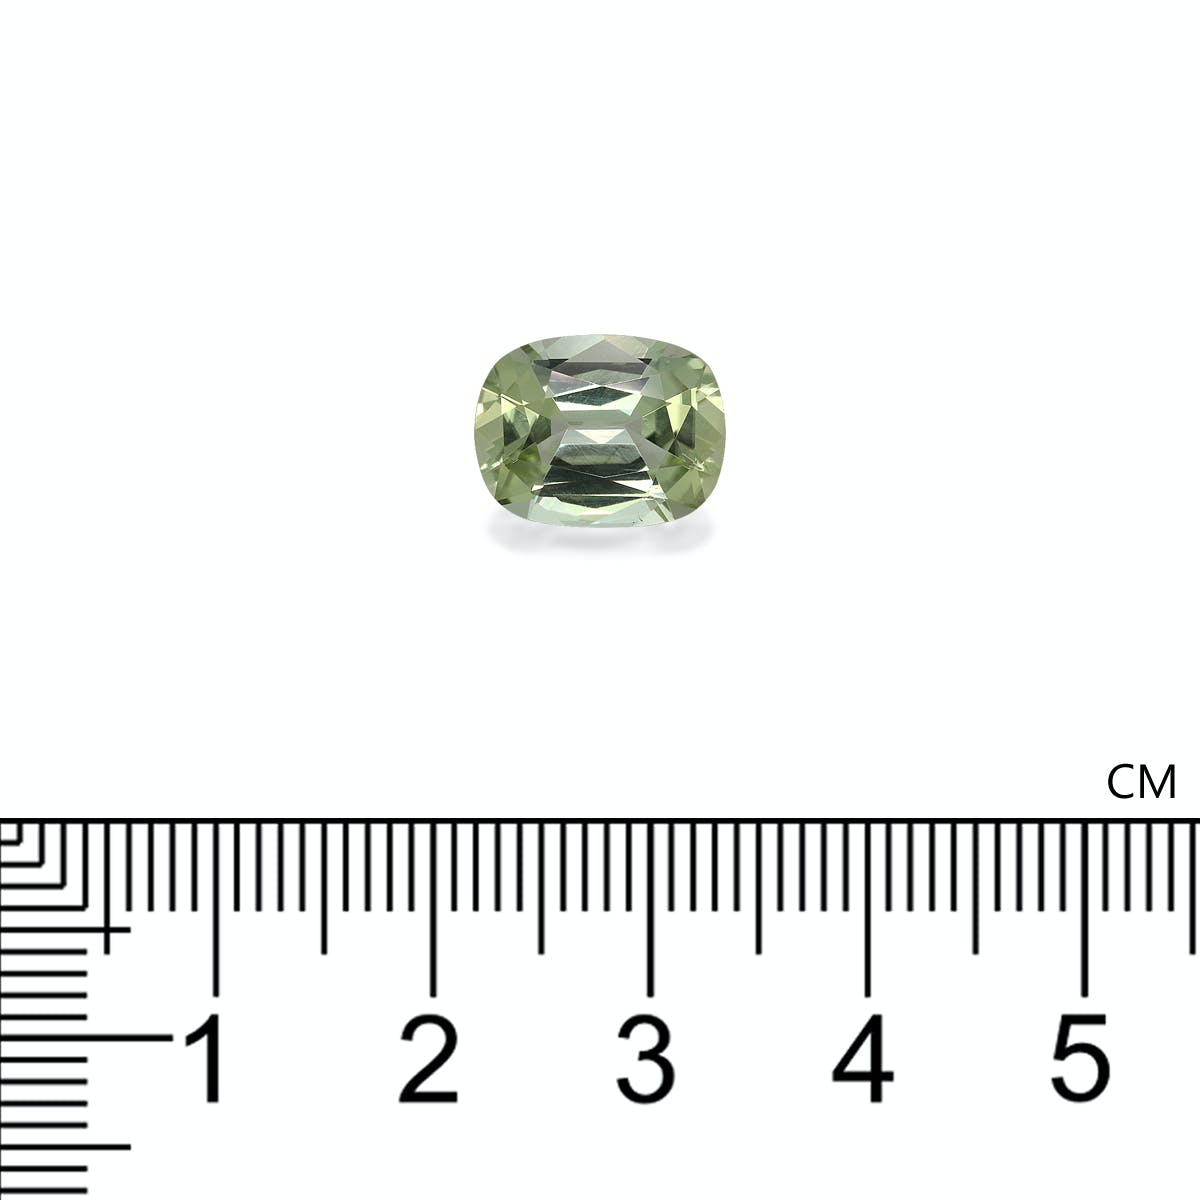 Picture of Pale Green Tourmaline 3.87ct - 11x9mm (TG1397)